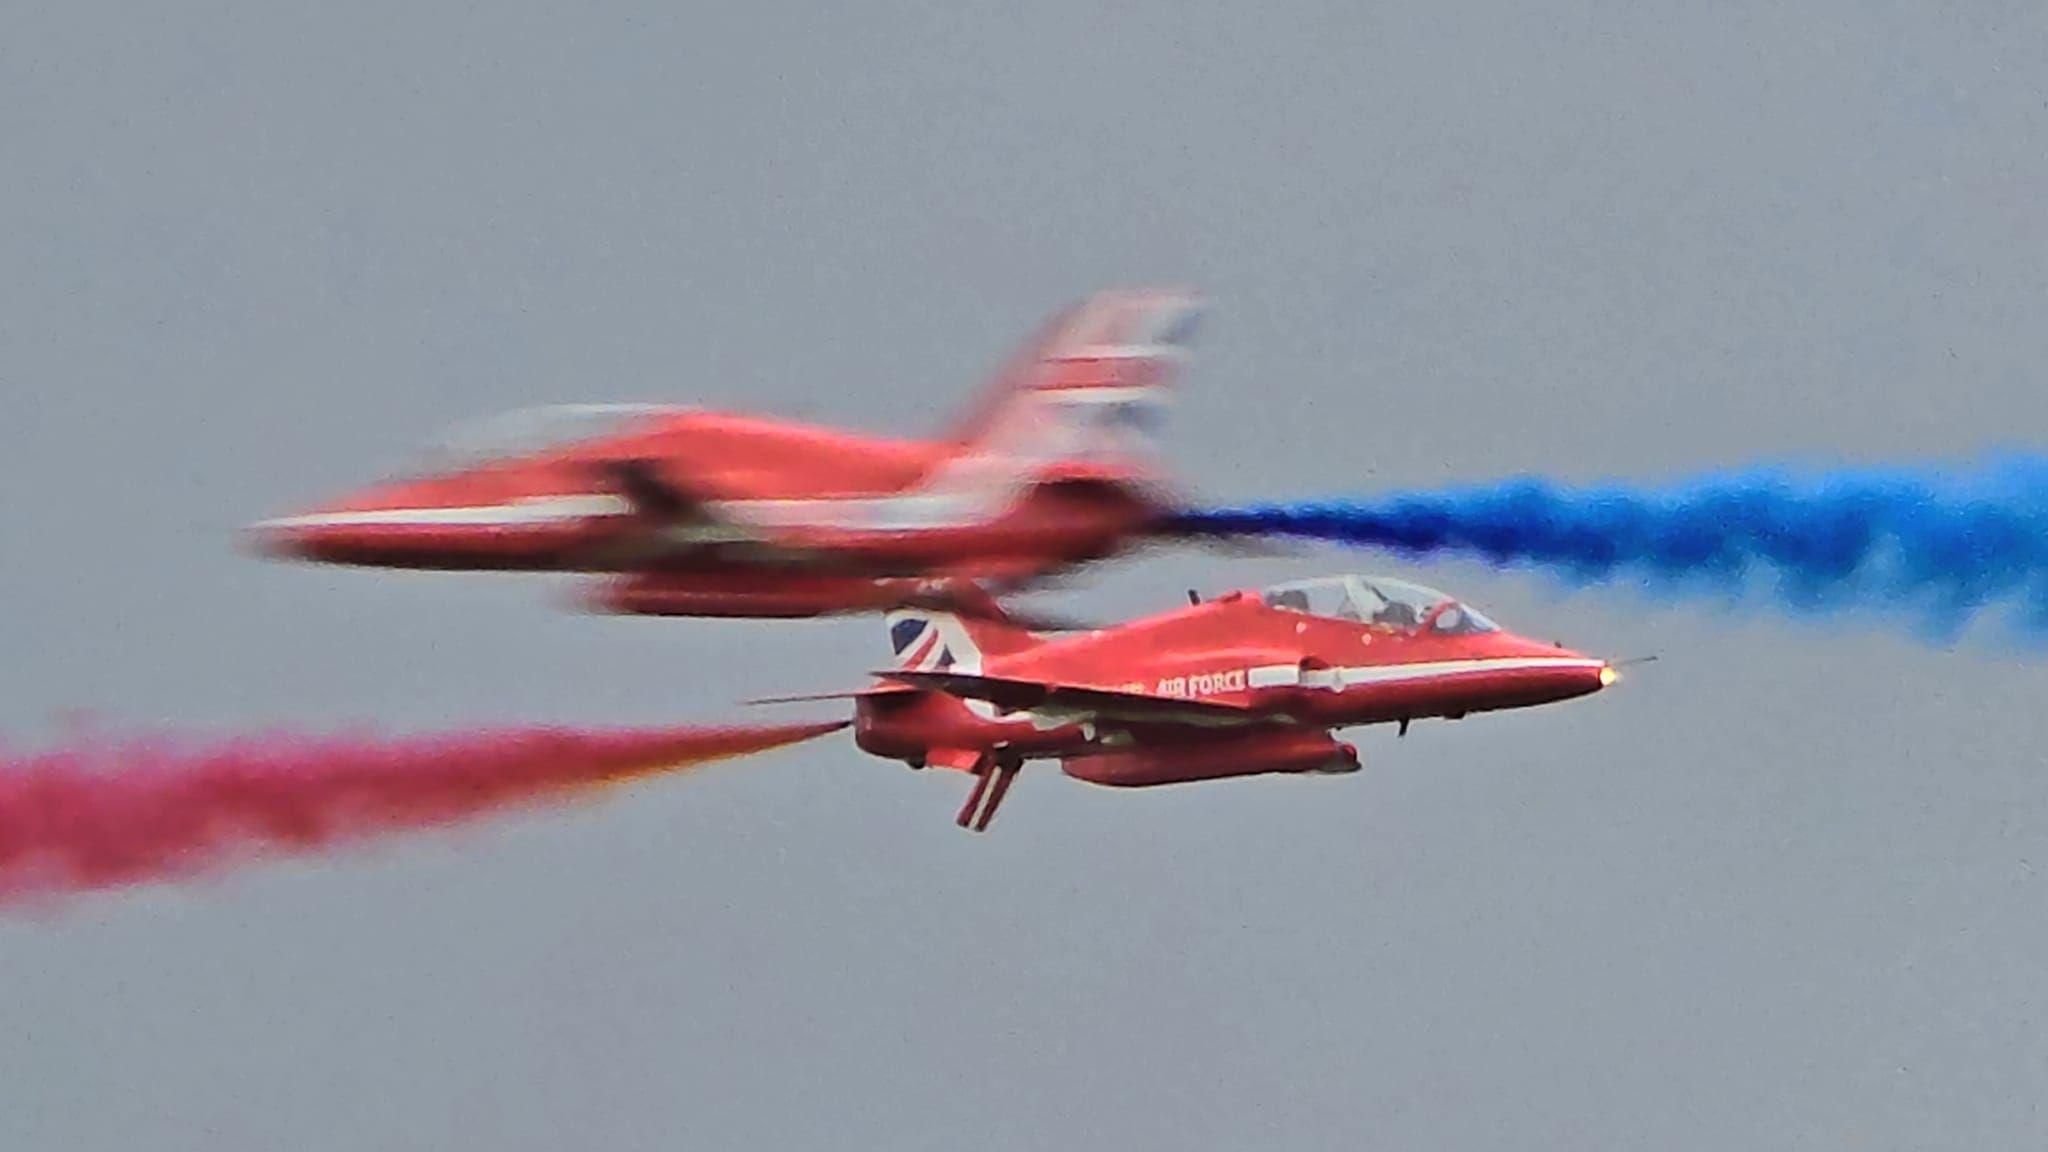 Two Red Arrow aircraft pass each other in the sky